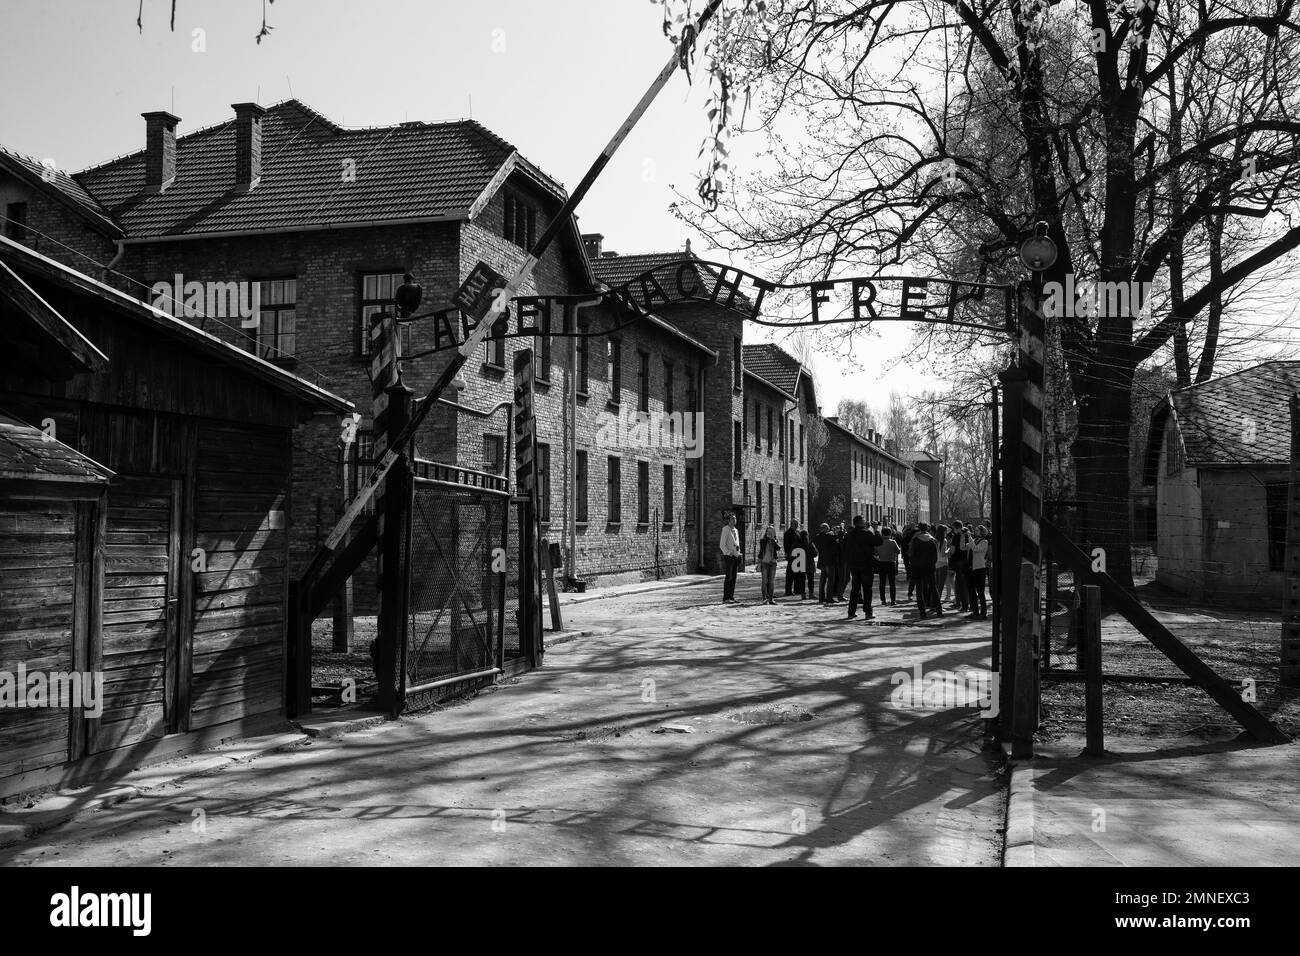 The main entrance to Auschwitz concentration camp with the ironic 'Arbeit Macht Frei' slogan (Work sets you free) above the gate in Poland Stock Photo